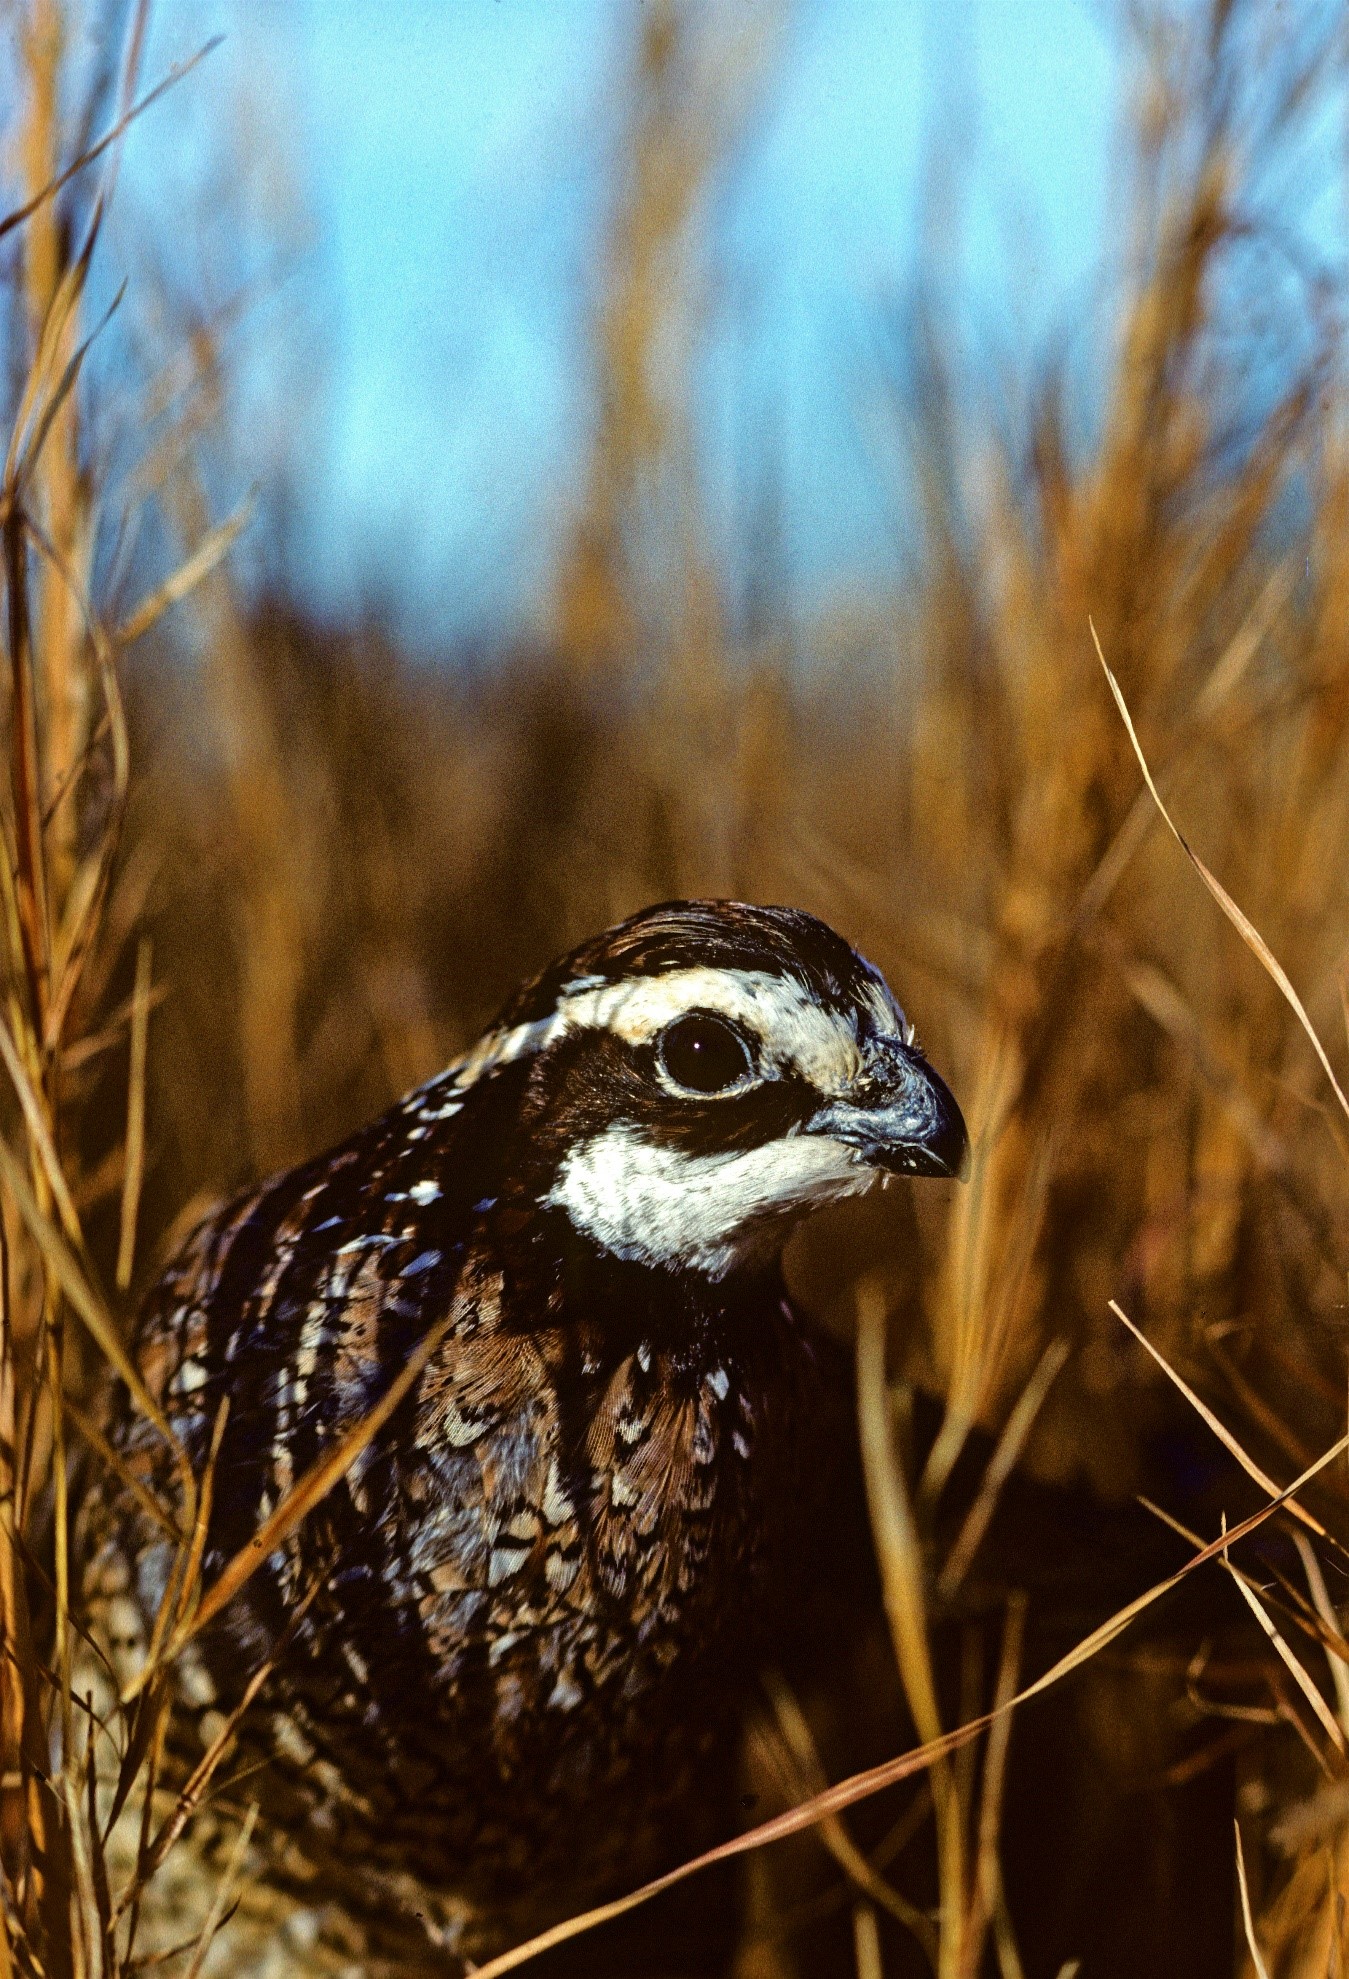 To help reconnect cattle and quail, USDA’s Natural Resources Conservation Service is working with cattle producers to replace non-native forage grasses, like fescue, with native warm-season grasses that create productive and palatable grazing options for livestock while benefiting quail and other wildlife species. 